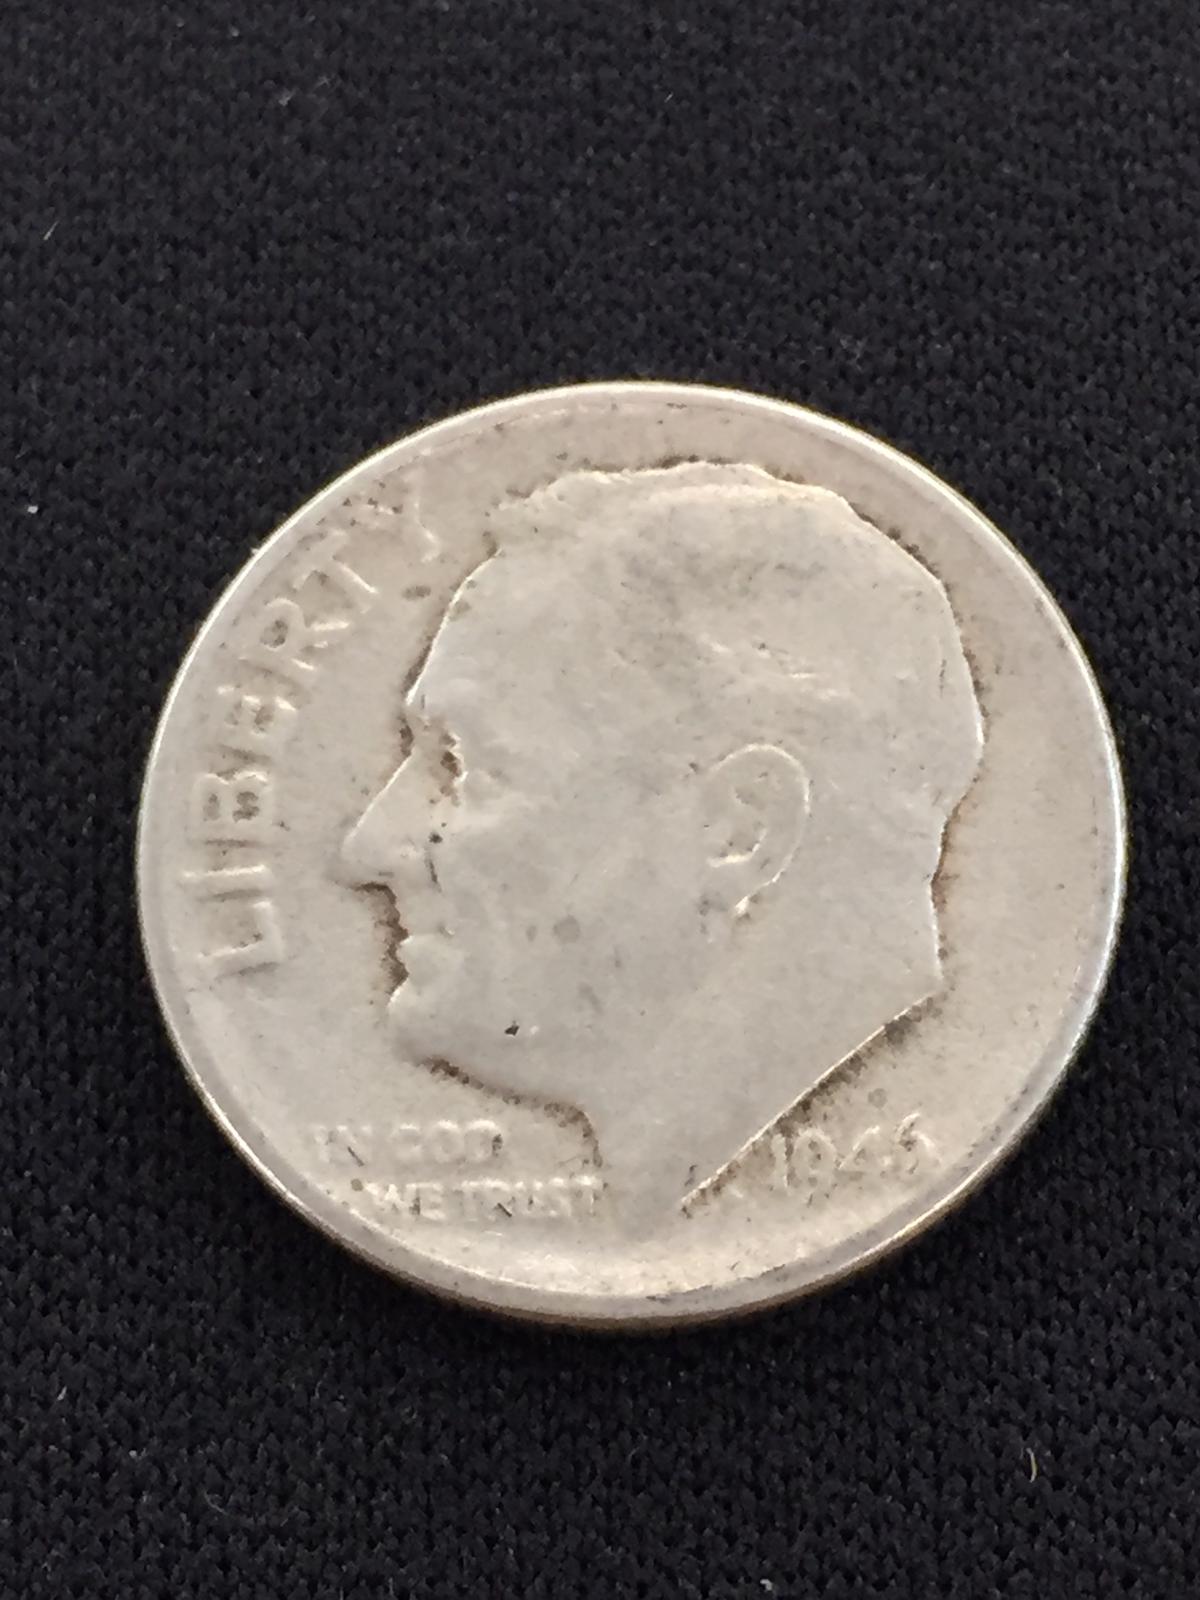 1946-D United States Roosevelt Dime - 90% Silver Coin